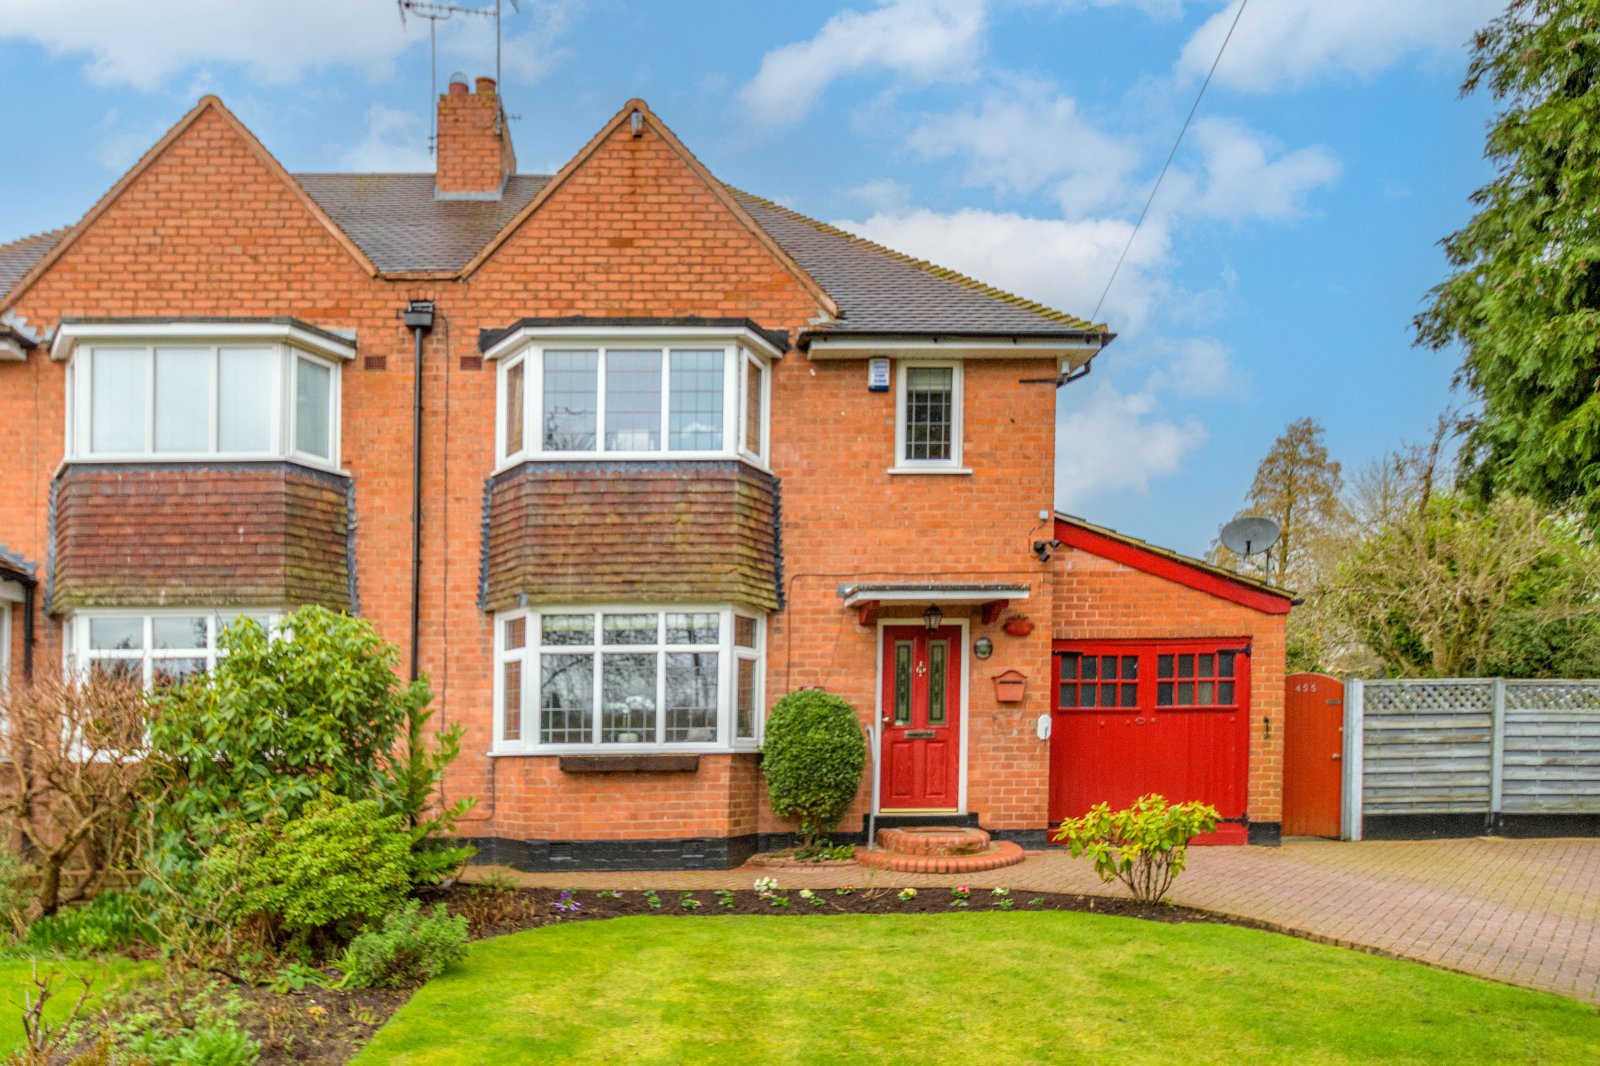 3 bed house for sale in Shenley Lane, Birmingham  - Property Image 1